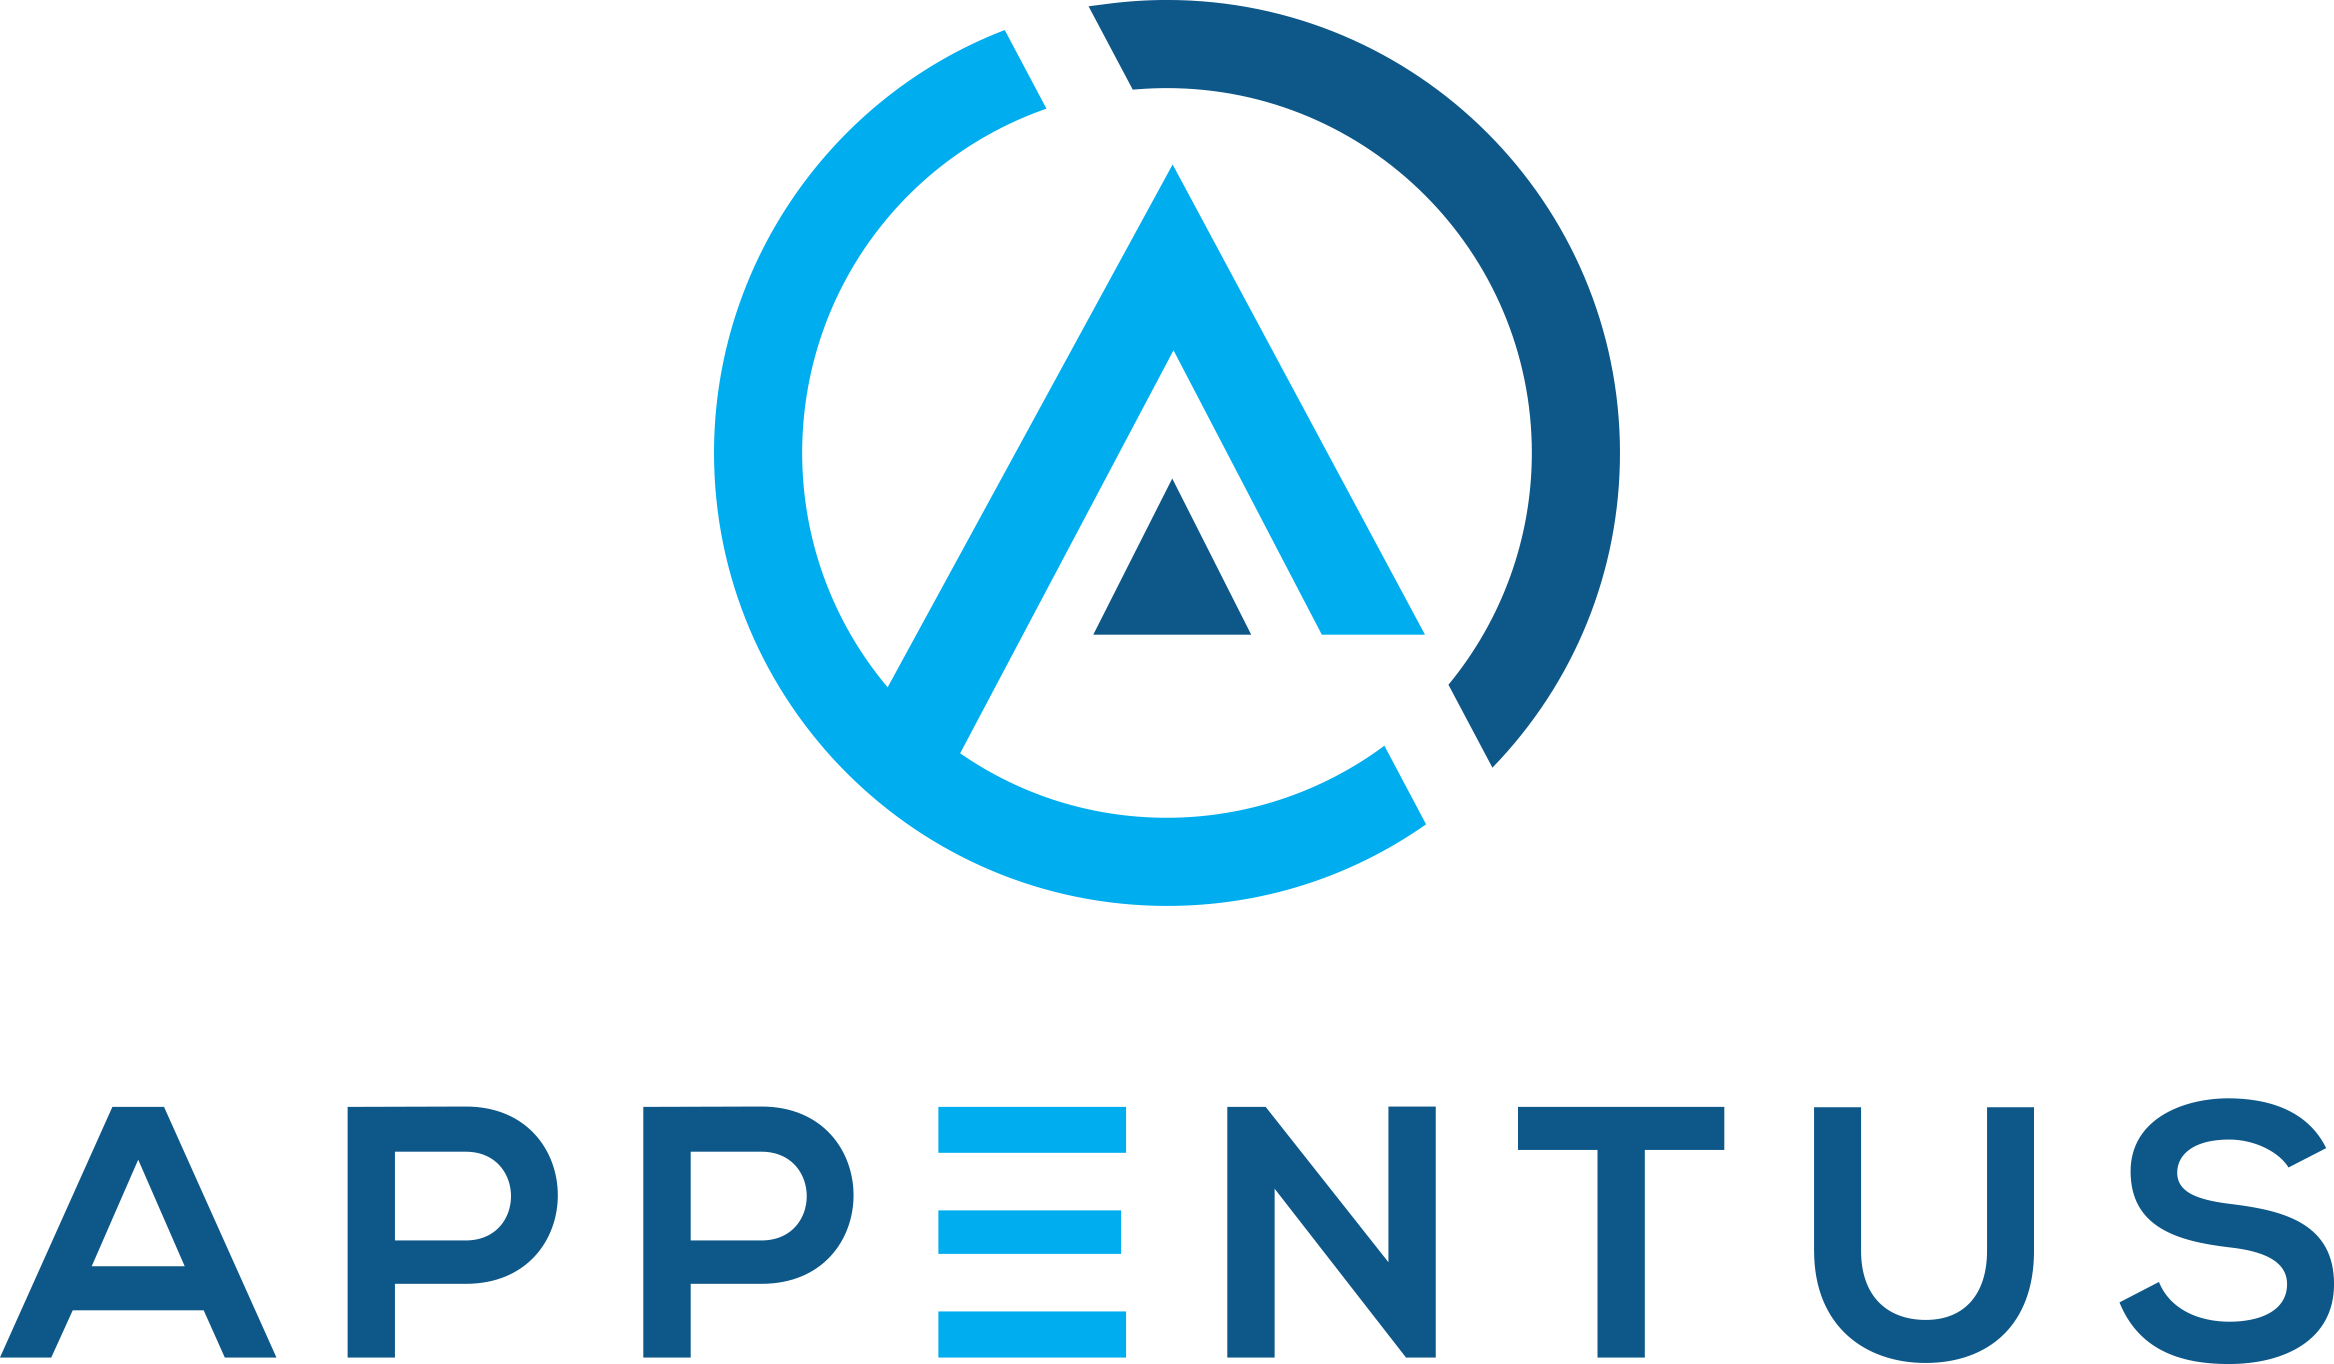 Appentus Technologies profile on Qualified.One